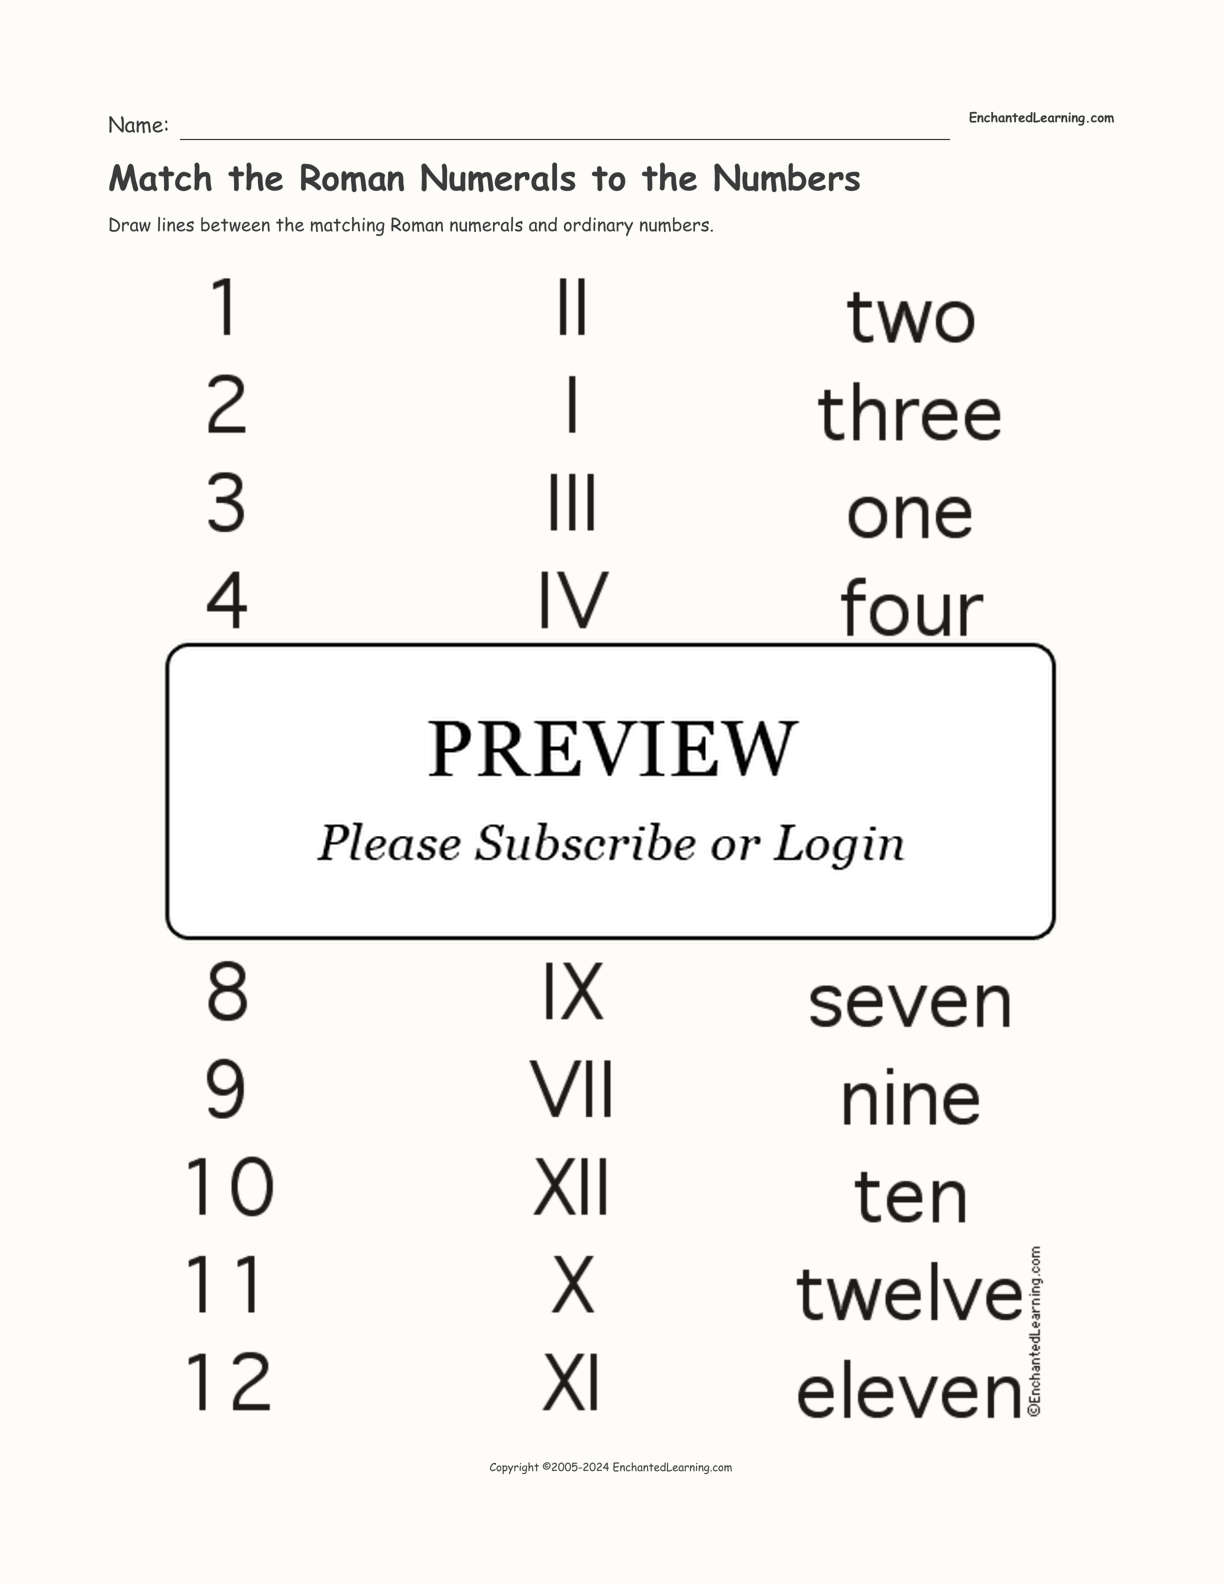 Match the Roman Numerals to the Numbers interactive worksheet page 1